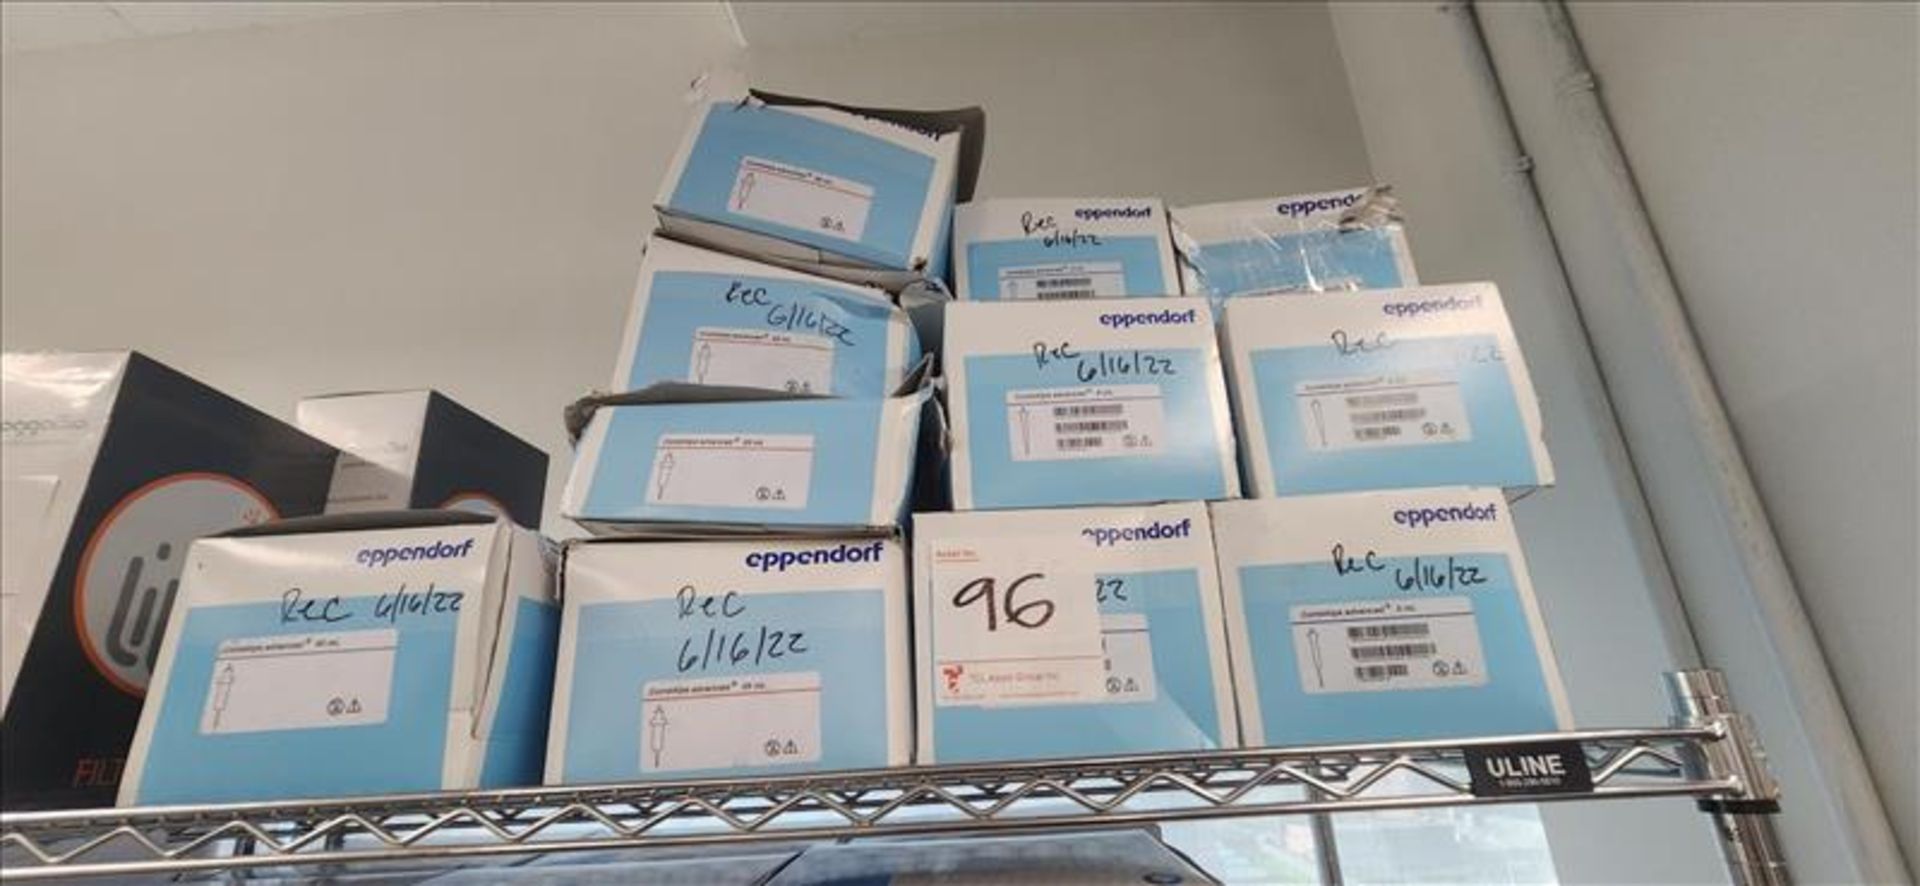 Lot of Eppendorf Combitips advanced Pipette Tips varying volumes - Image 2 of 2